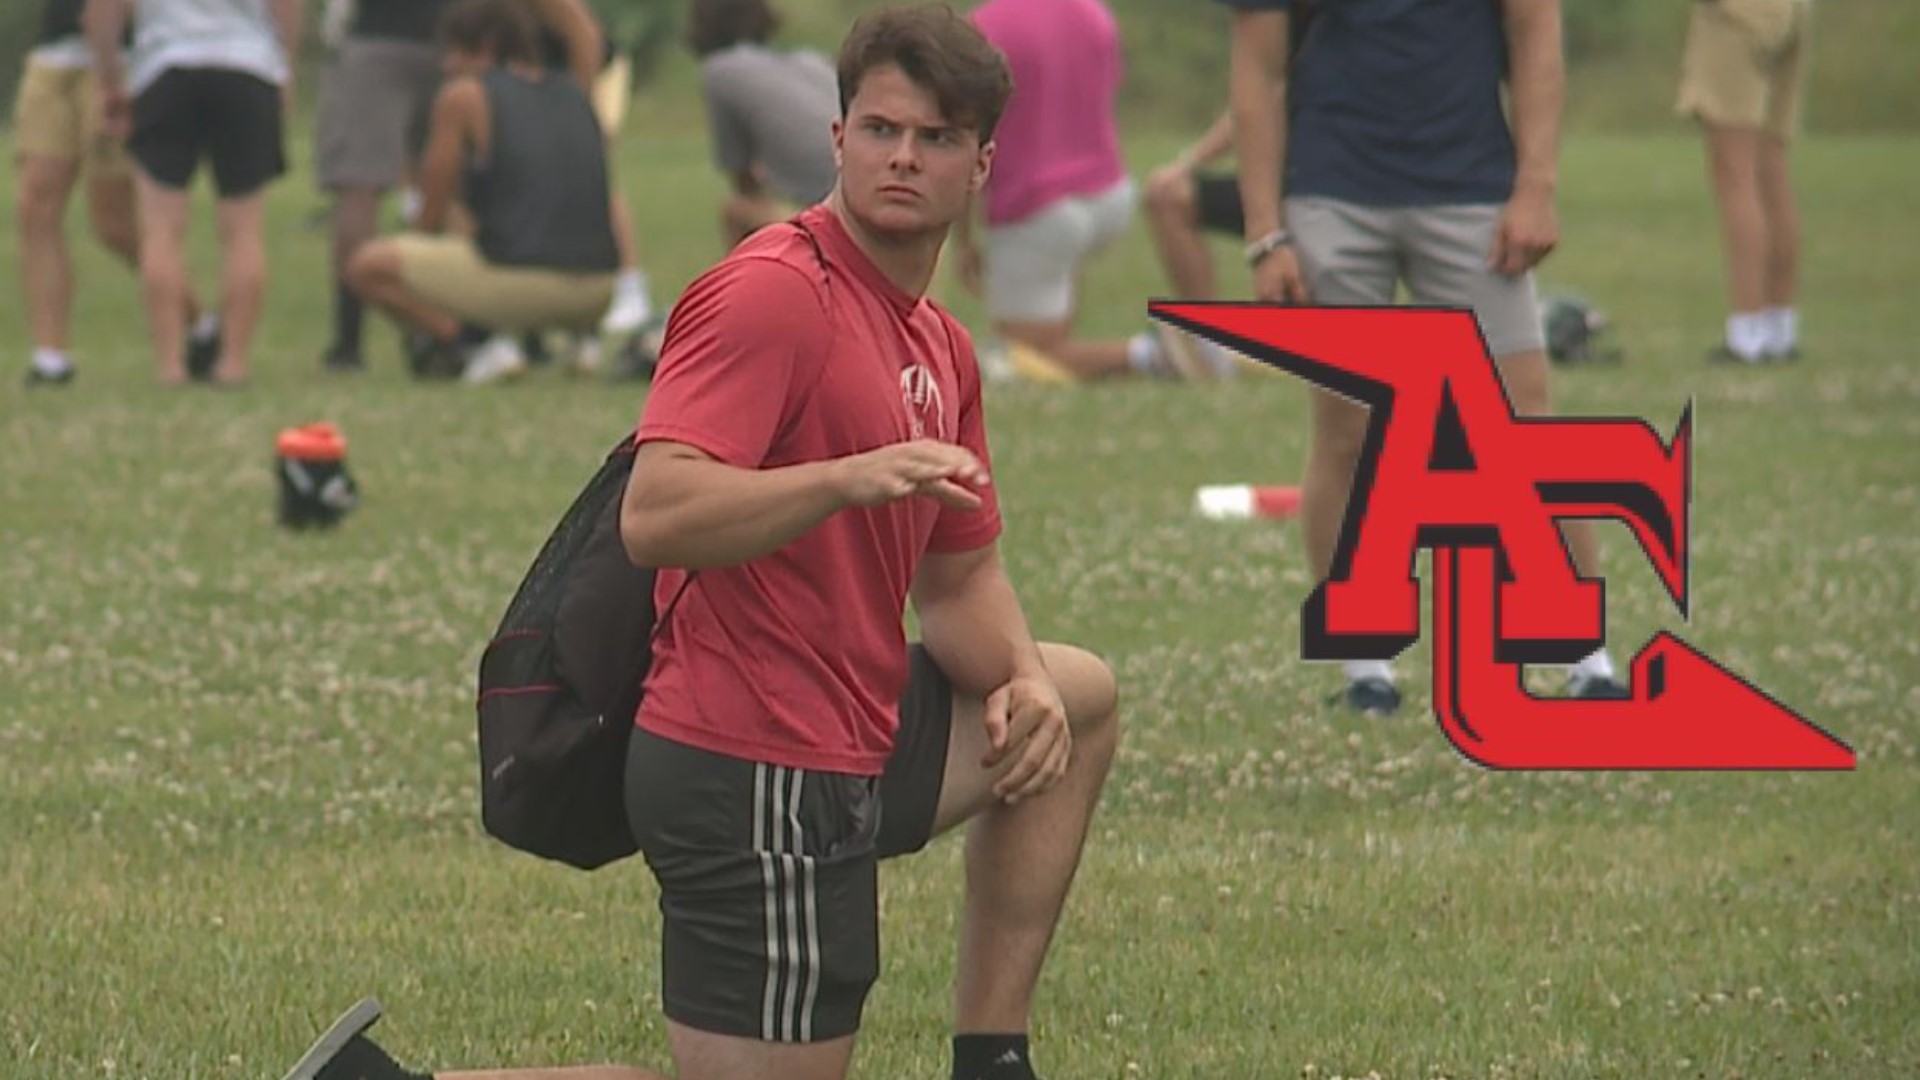 Despite an injury derailing his summer plans, Annville-Cleona senior Alex Long learns from his journalism classes that comebacks happen every day.